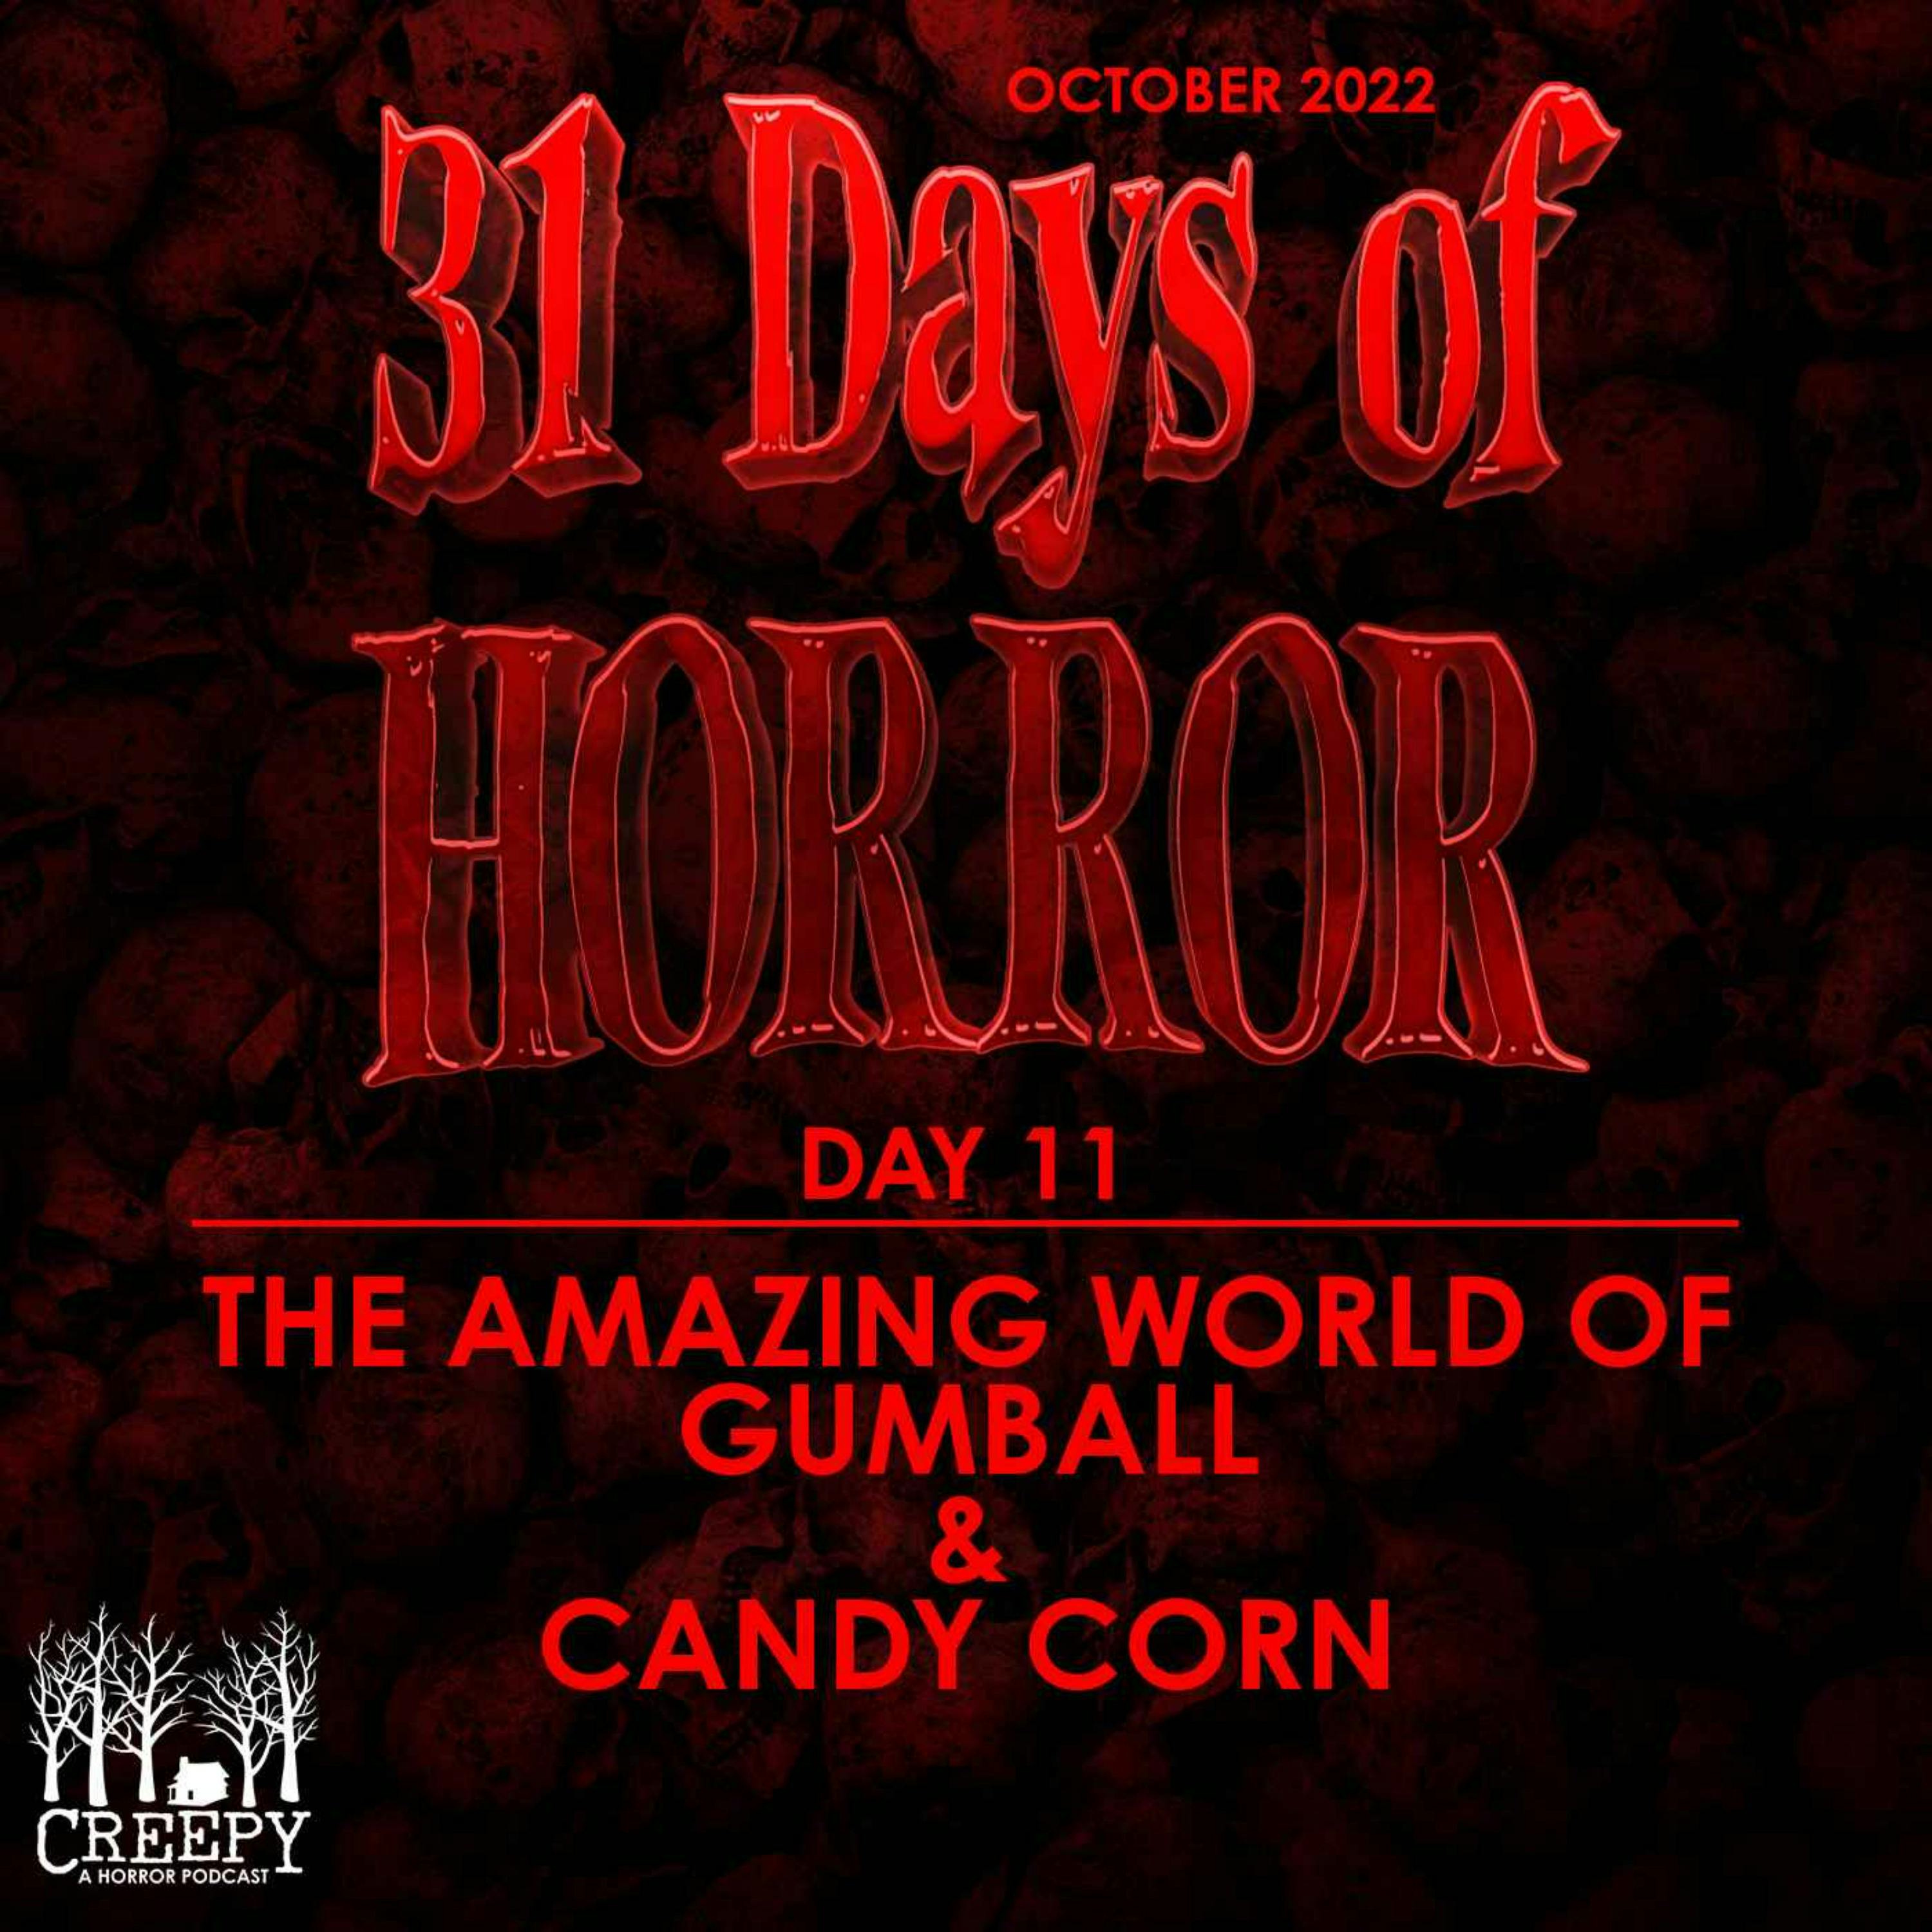 Day 11 - The Amazing World of Gumball: The Grieving & Candy Corn